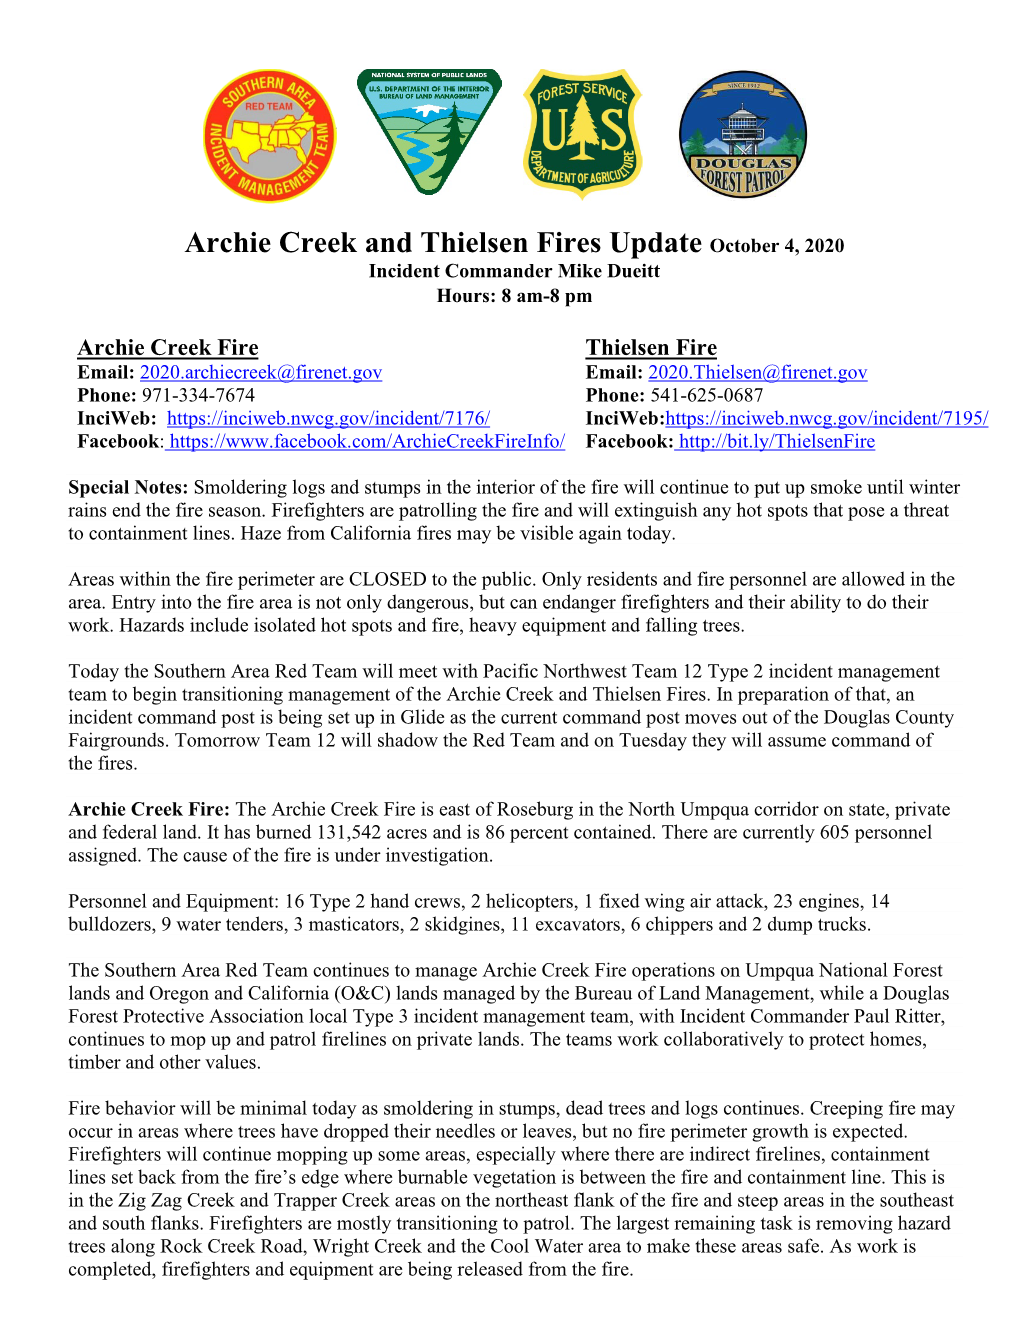 Archie Creek and Thielsen Fires Update October 4, 2020 Incident Commander Mike Dueitt Hours: 8 Am-8 Pm